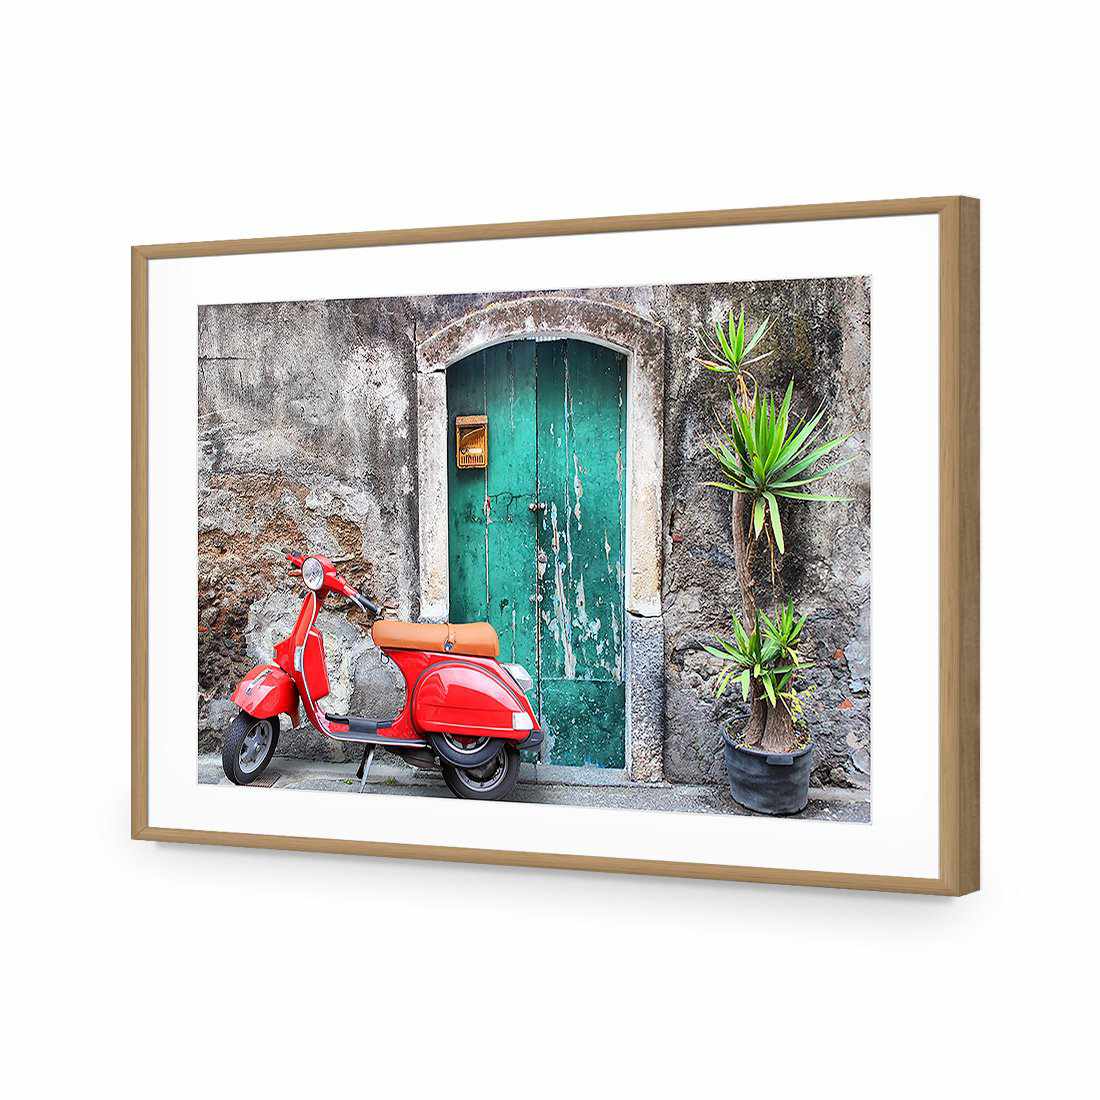 Vintage Door And Scooter-Acrylic-Wall Art Design-With Border-Acrylic - Oak Frame-45x30cm-Wall Art Designs